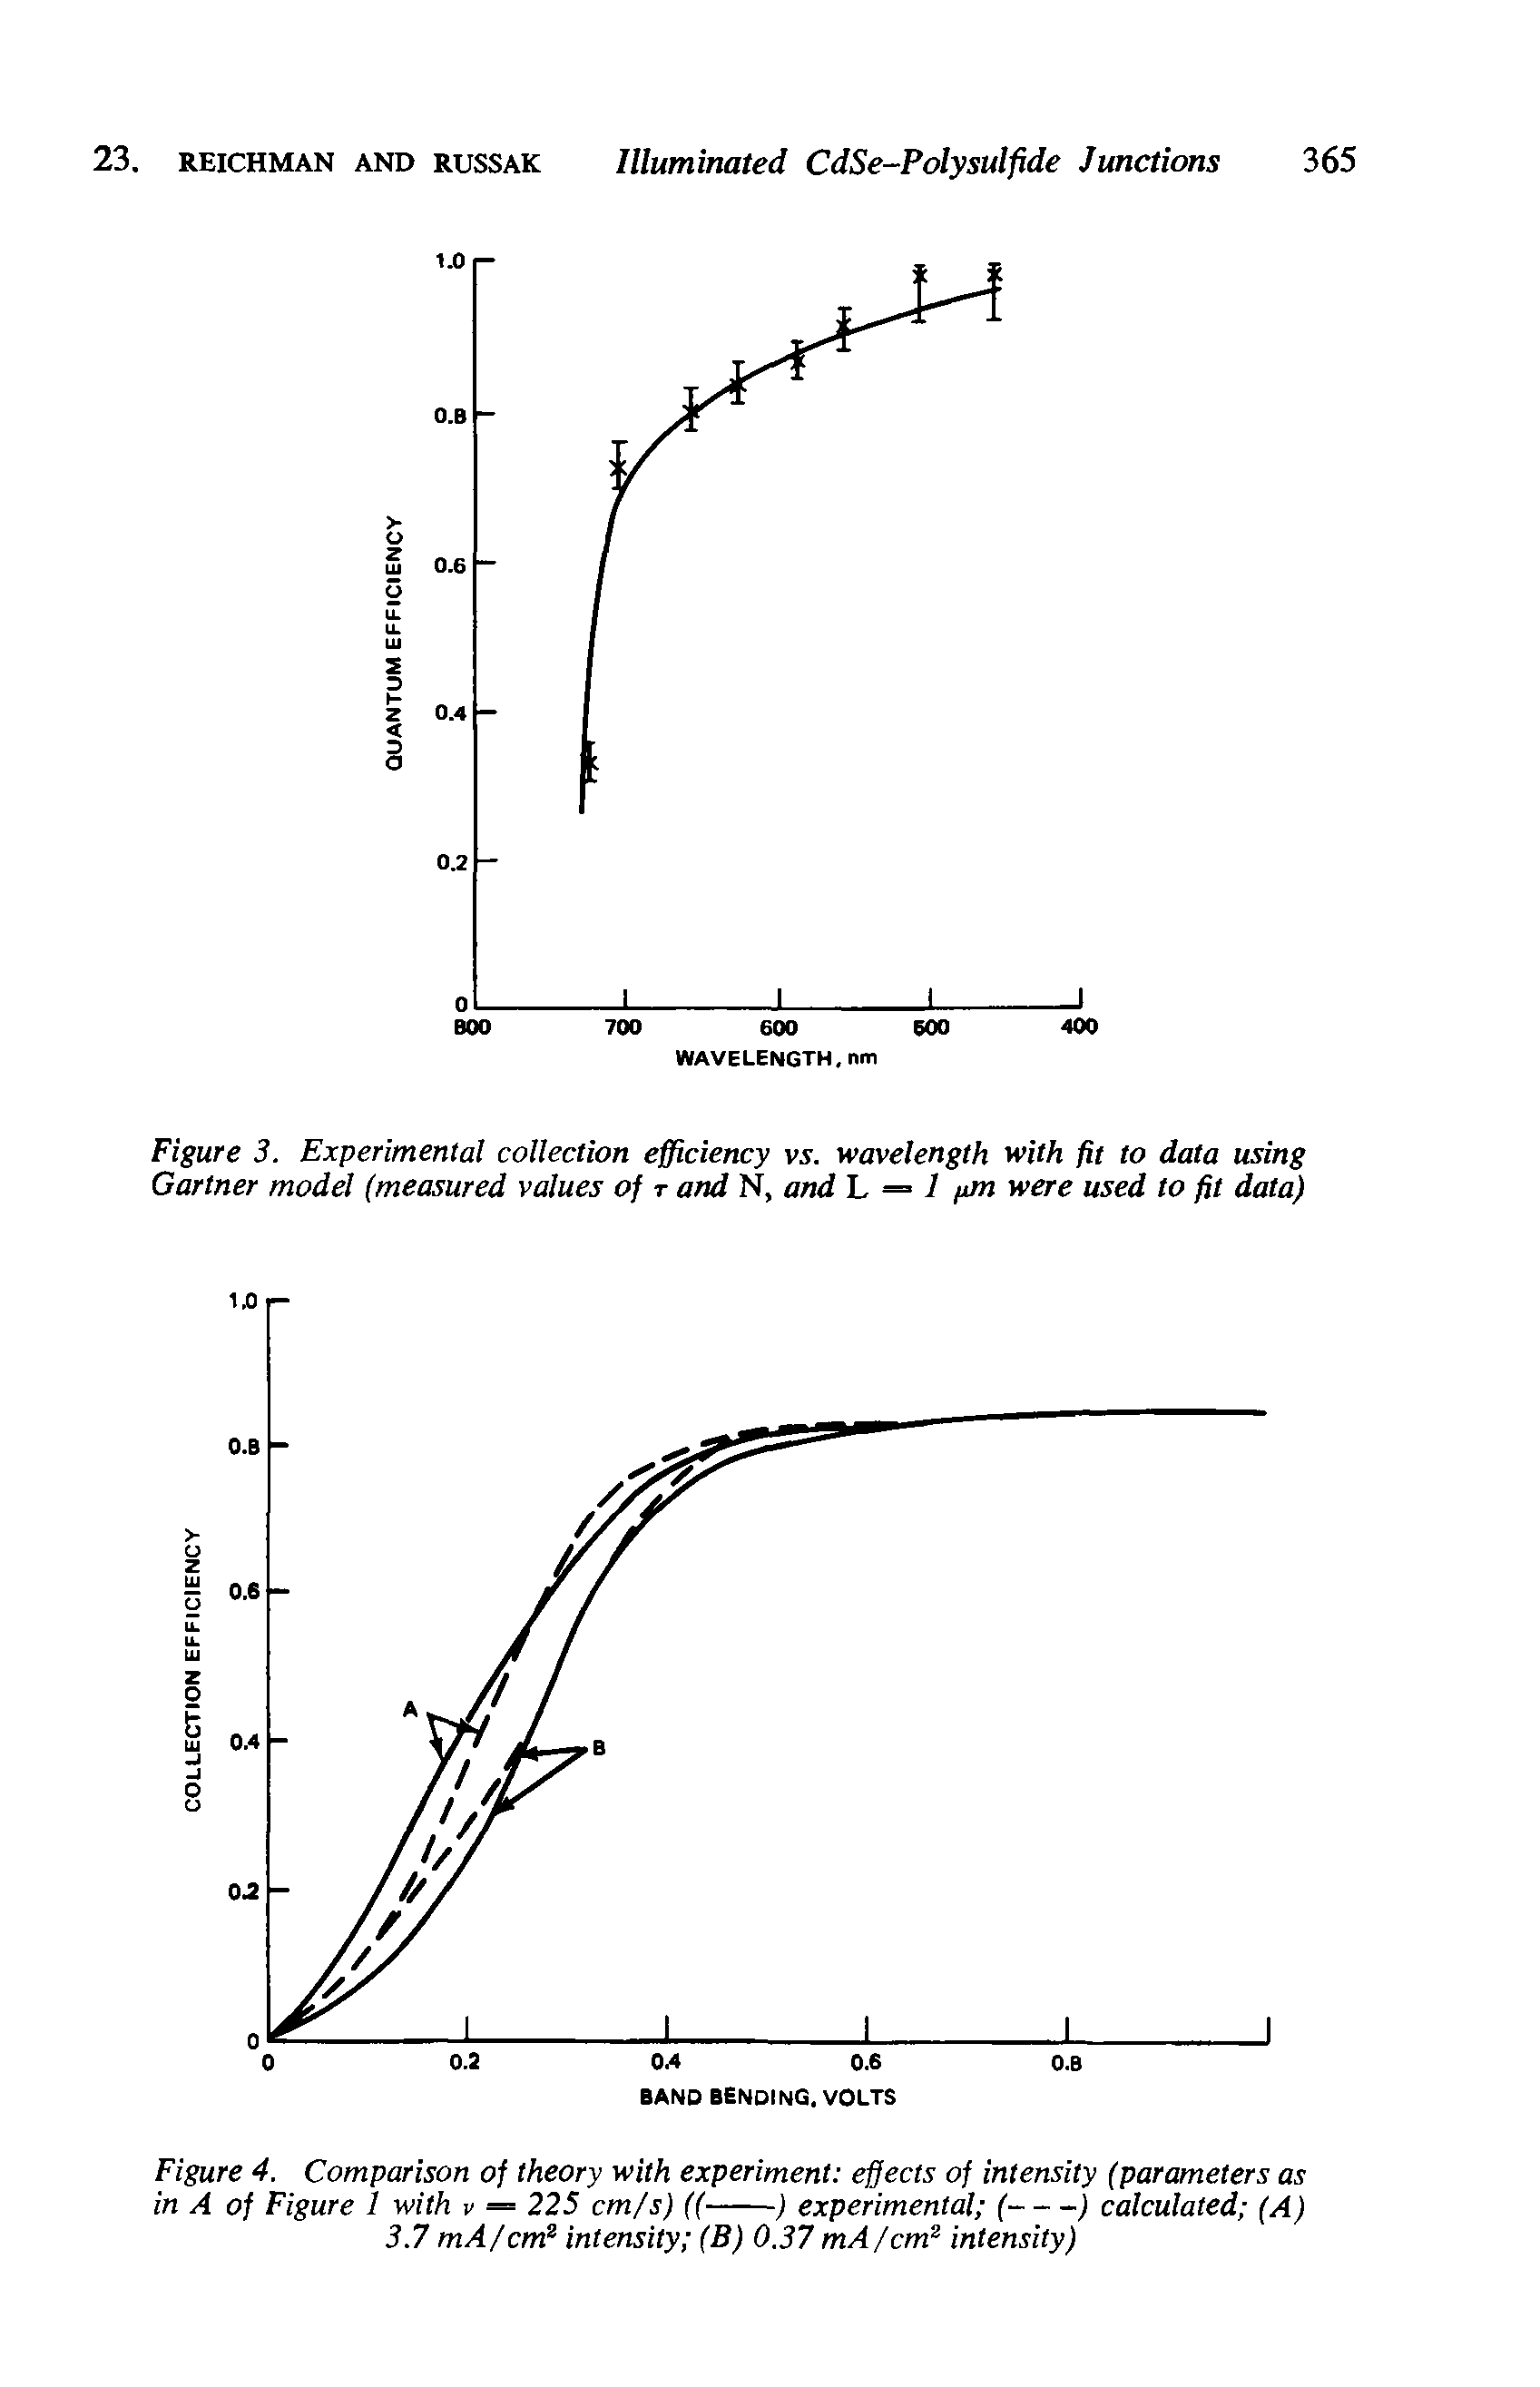 Figure 3. Experimental collection efficiency vs. wavelength with fit to data using Gartner model (measured values of t and N, and L = 1 pm were used to fit data)...